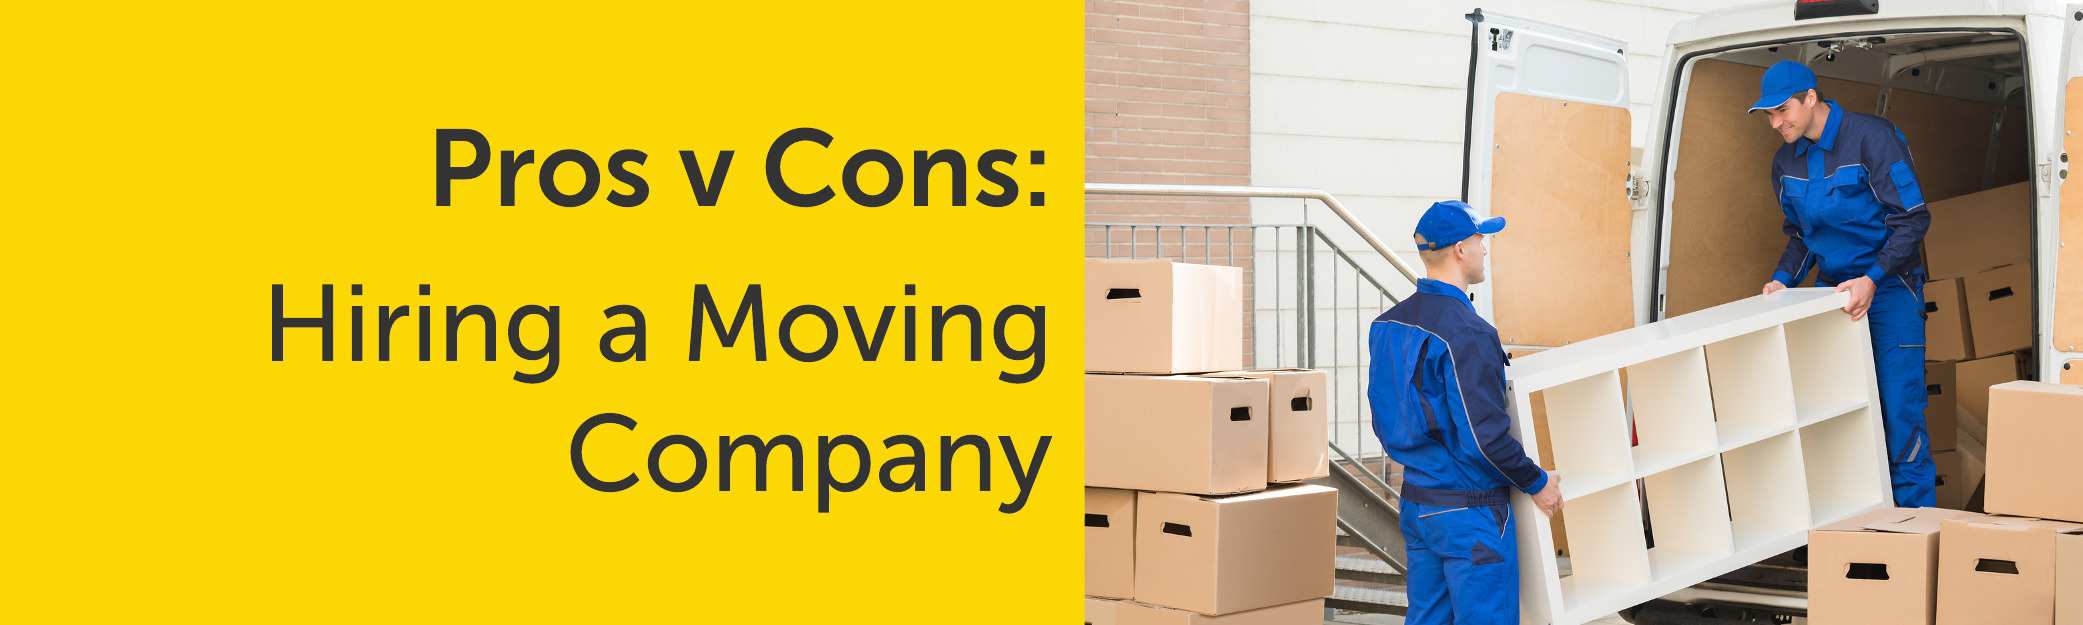 Hiring Professional Movers: Pros & Cons